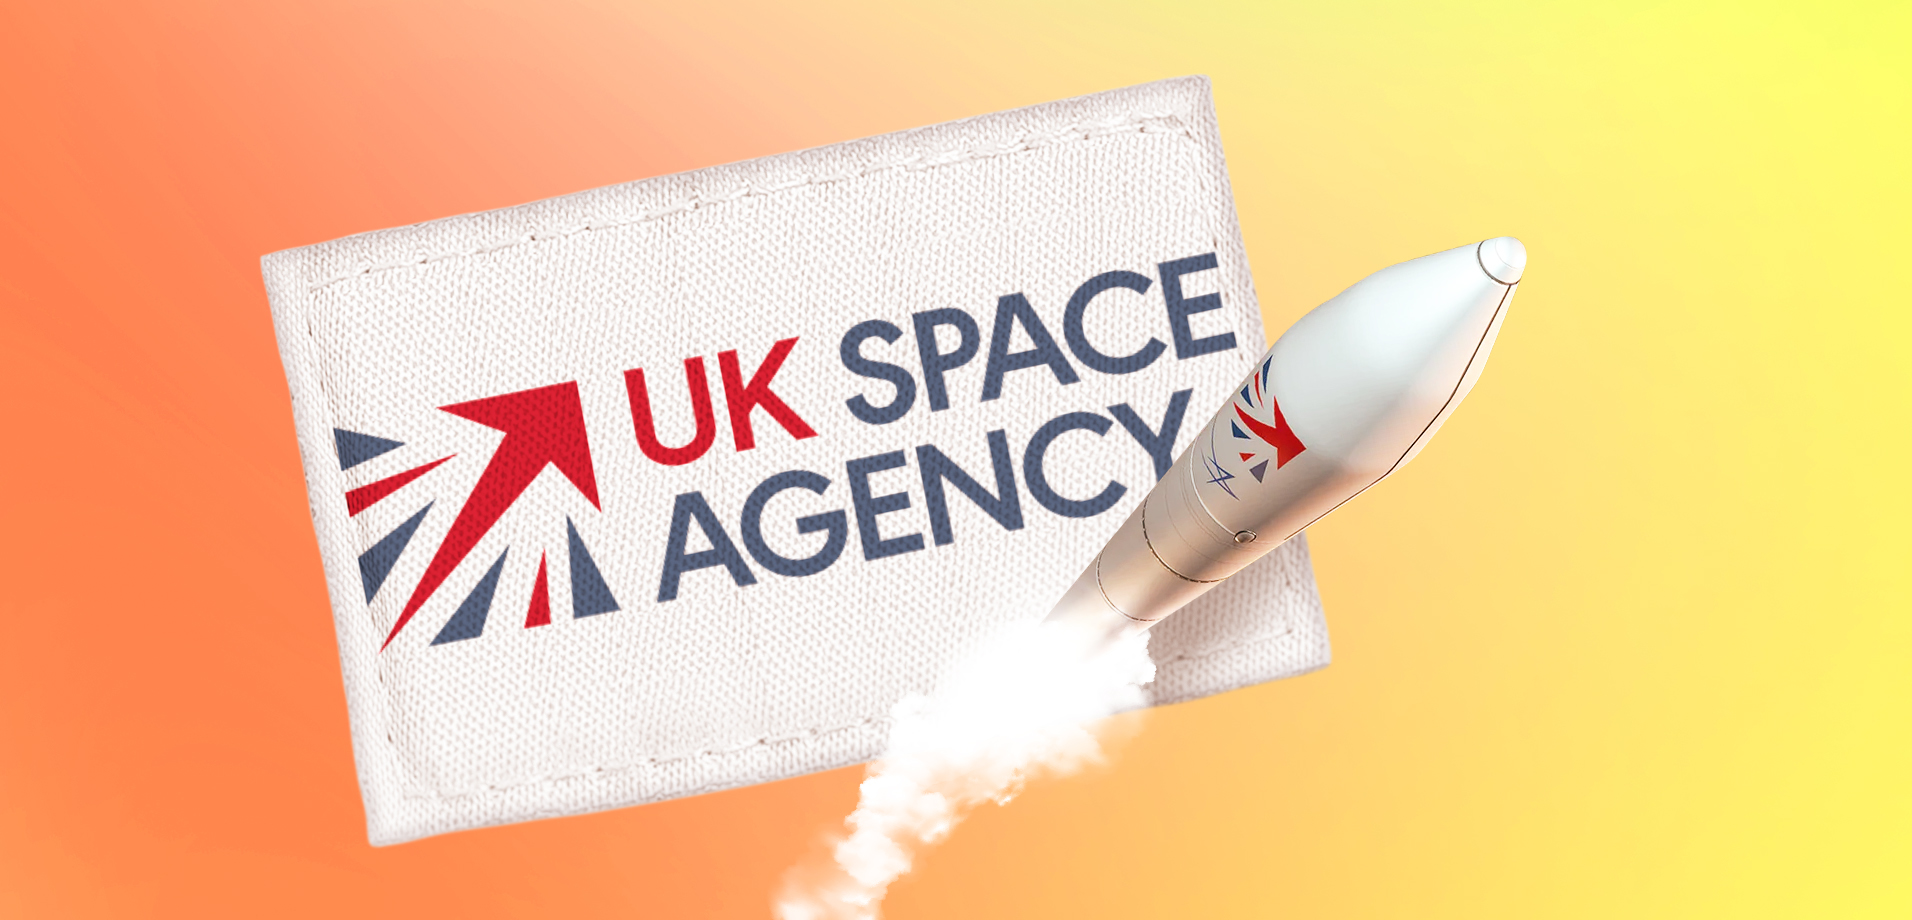 UKSA Readies £ 65mln For New Space Technology – Here’s Why